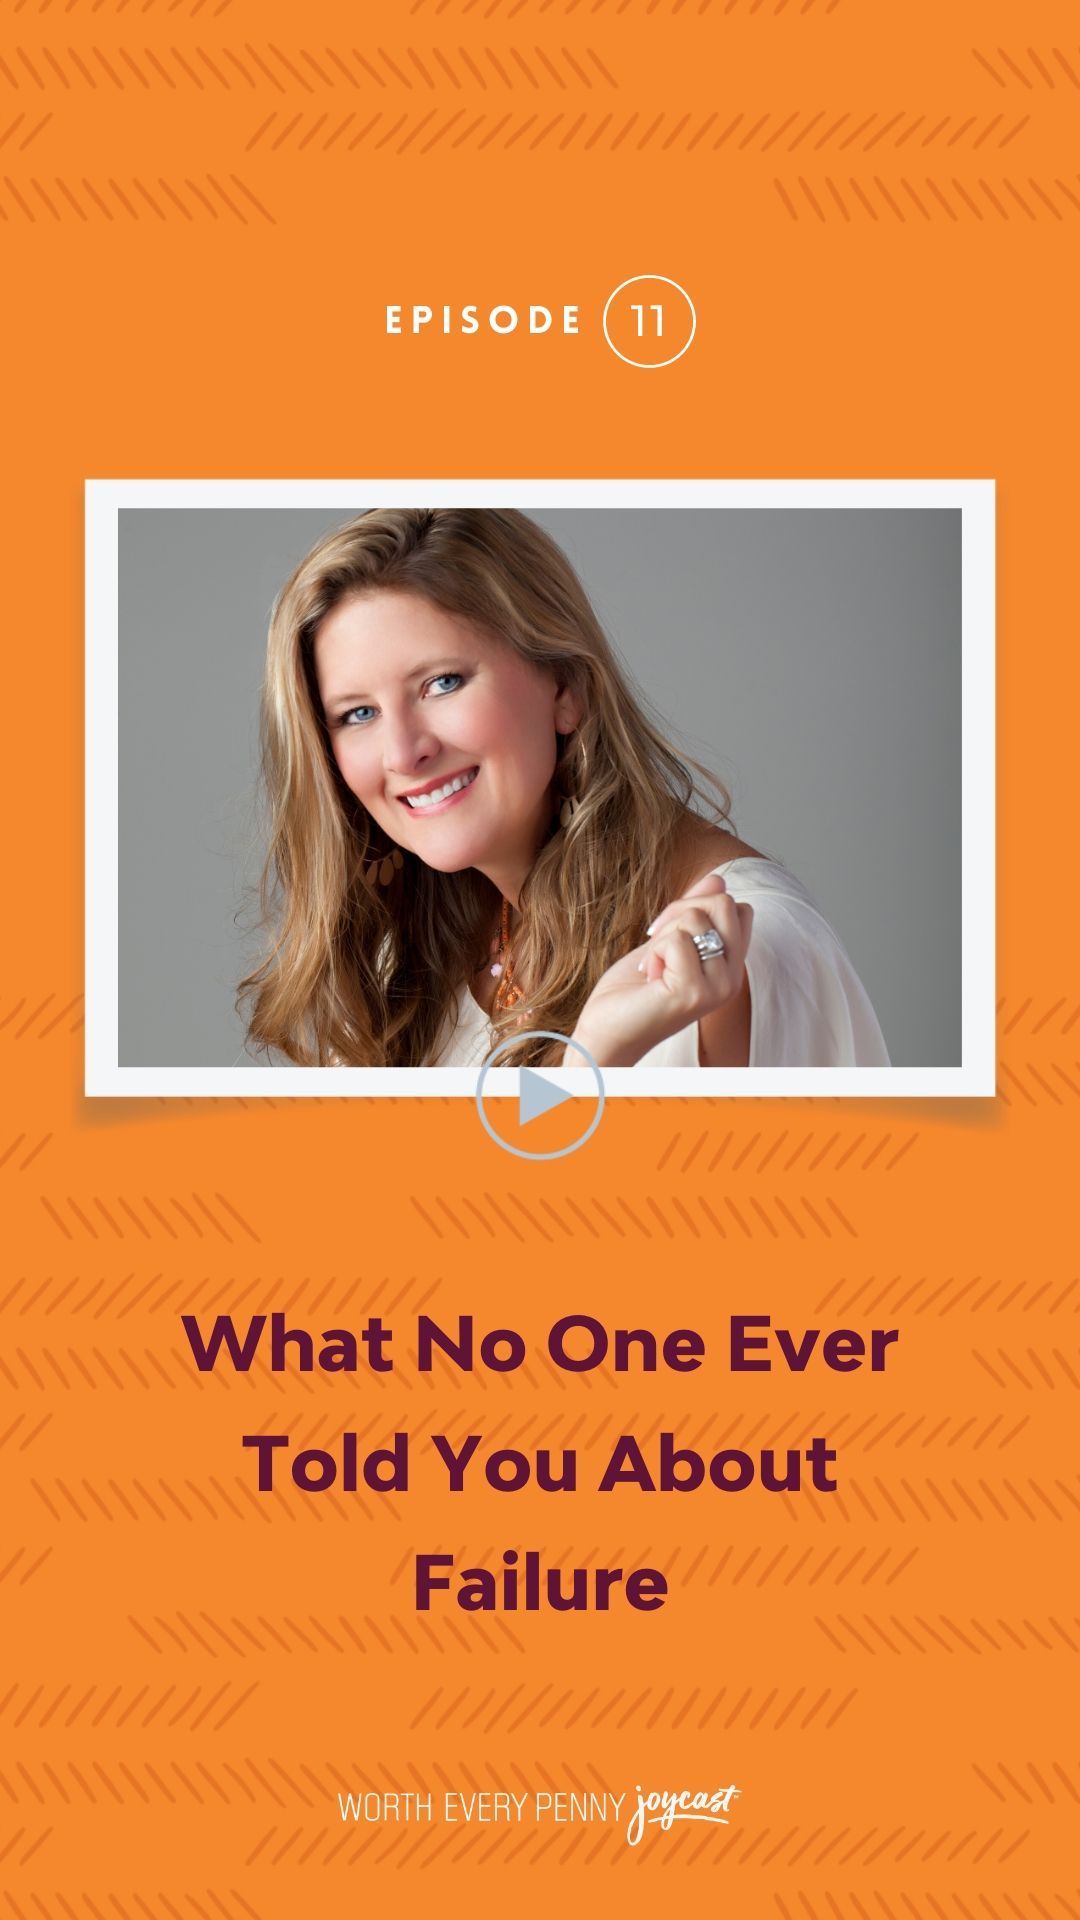 Episode 11: What No One Ever Told You About Failure